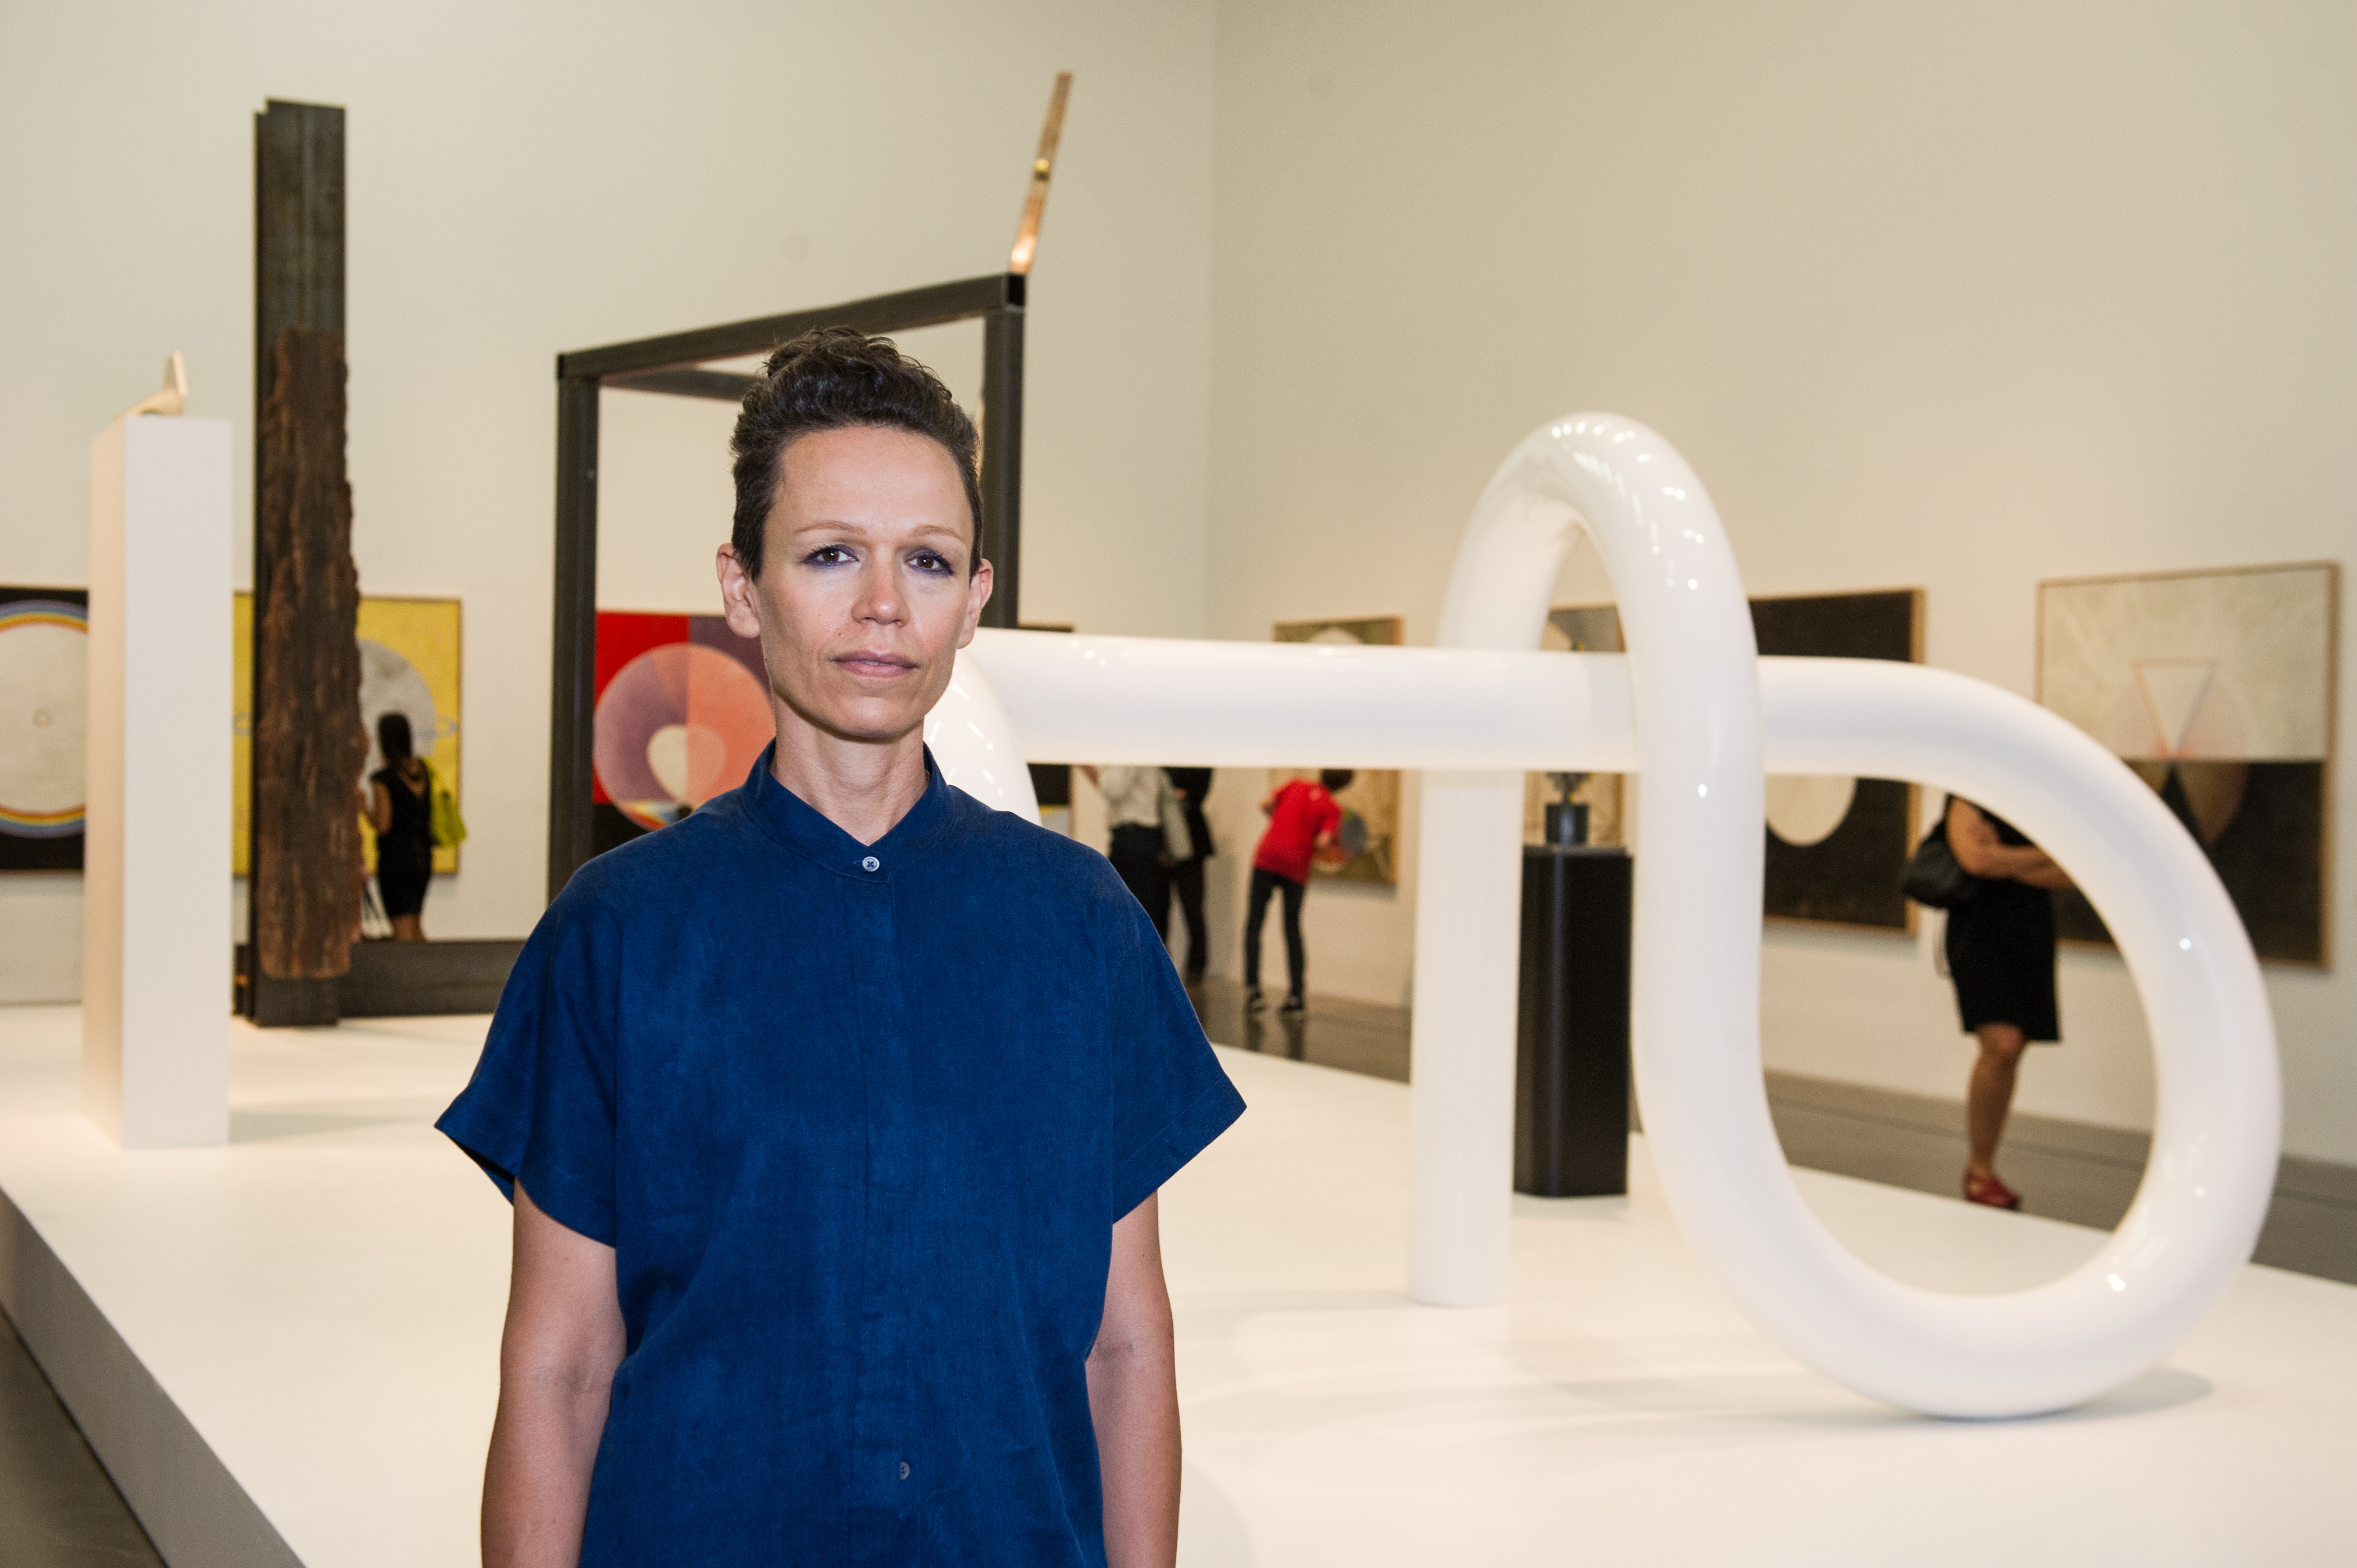 Carol Bove at the New Museum for the opening of "The Keeper." Courtesy of Madison McGaw/BFA.